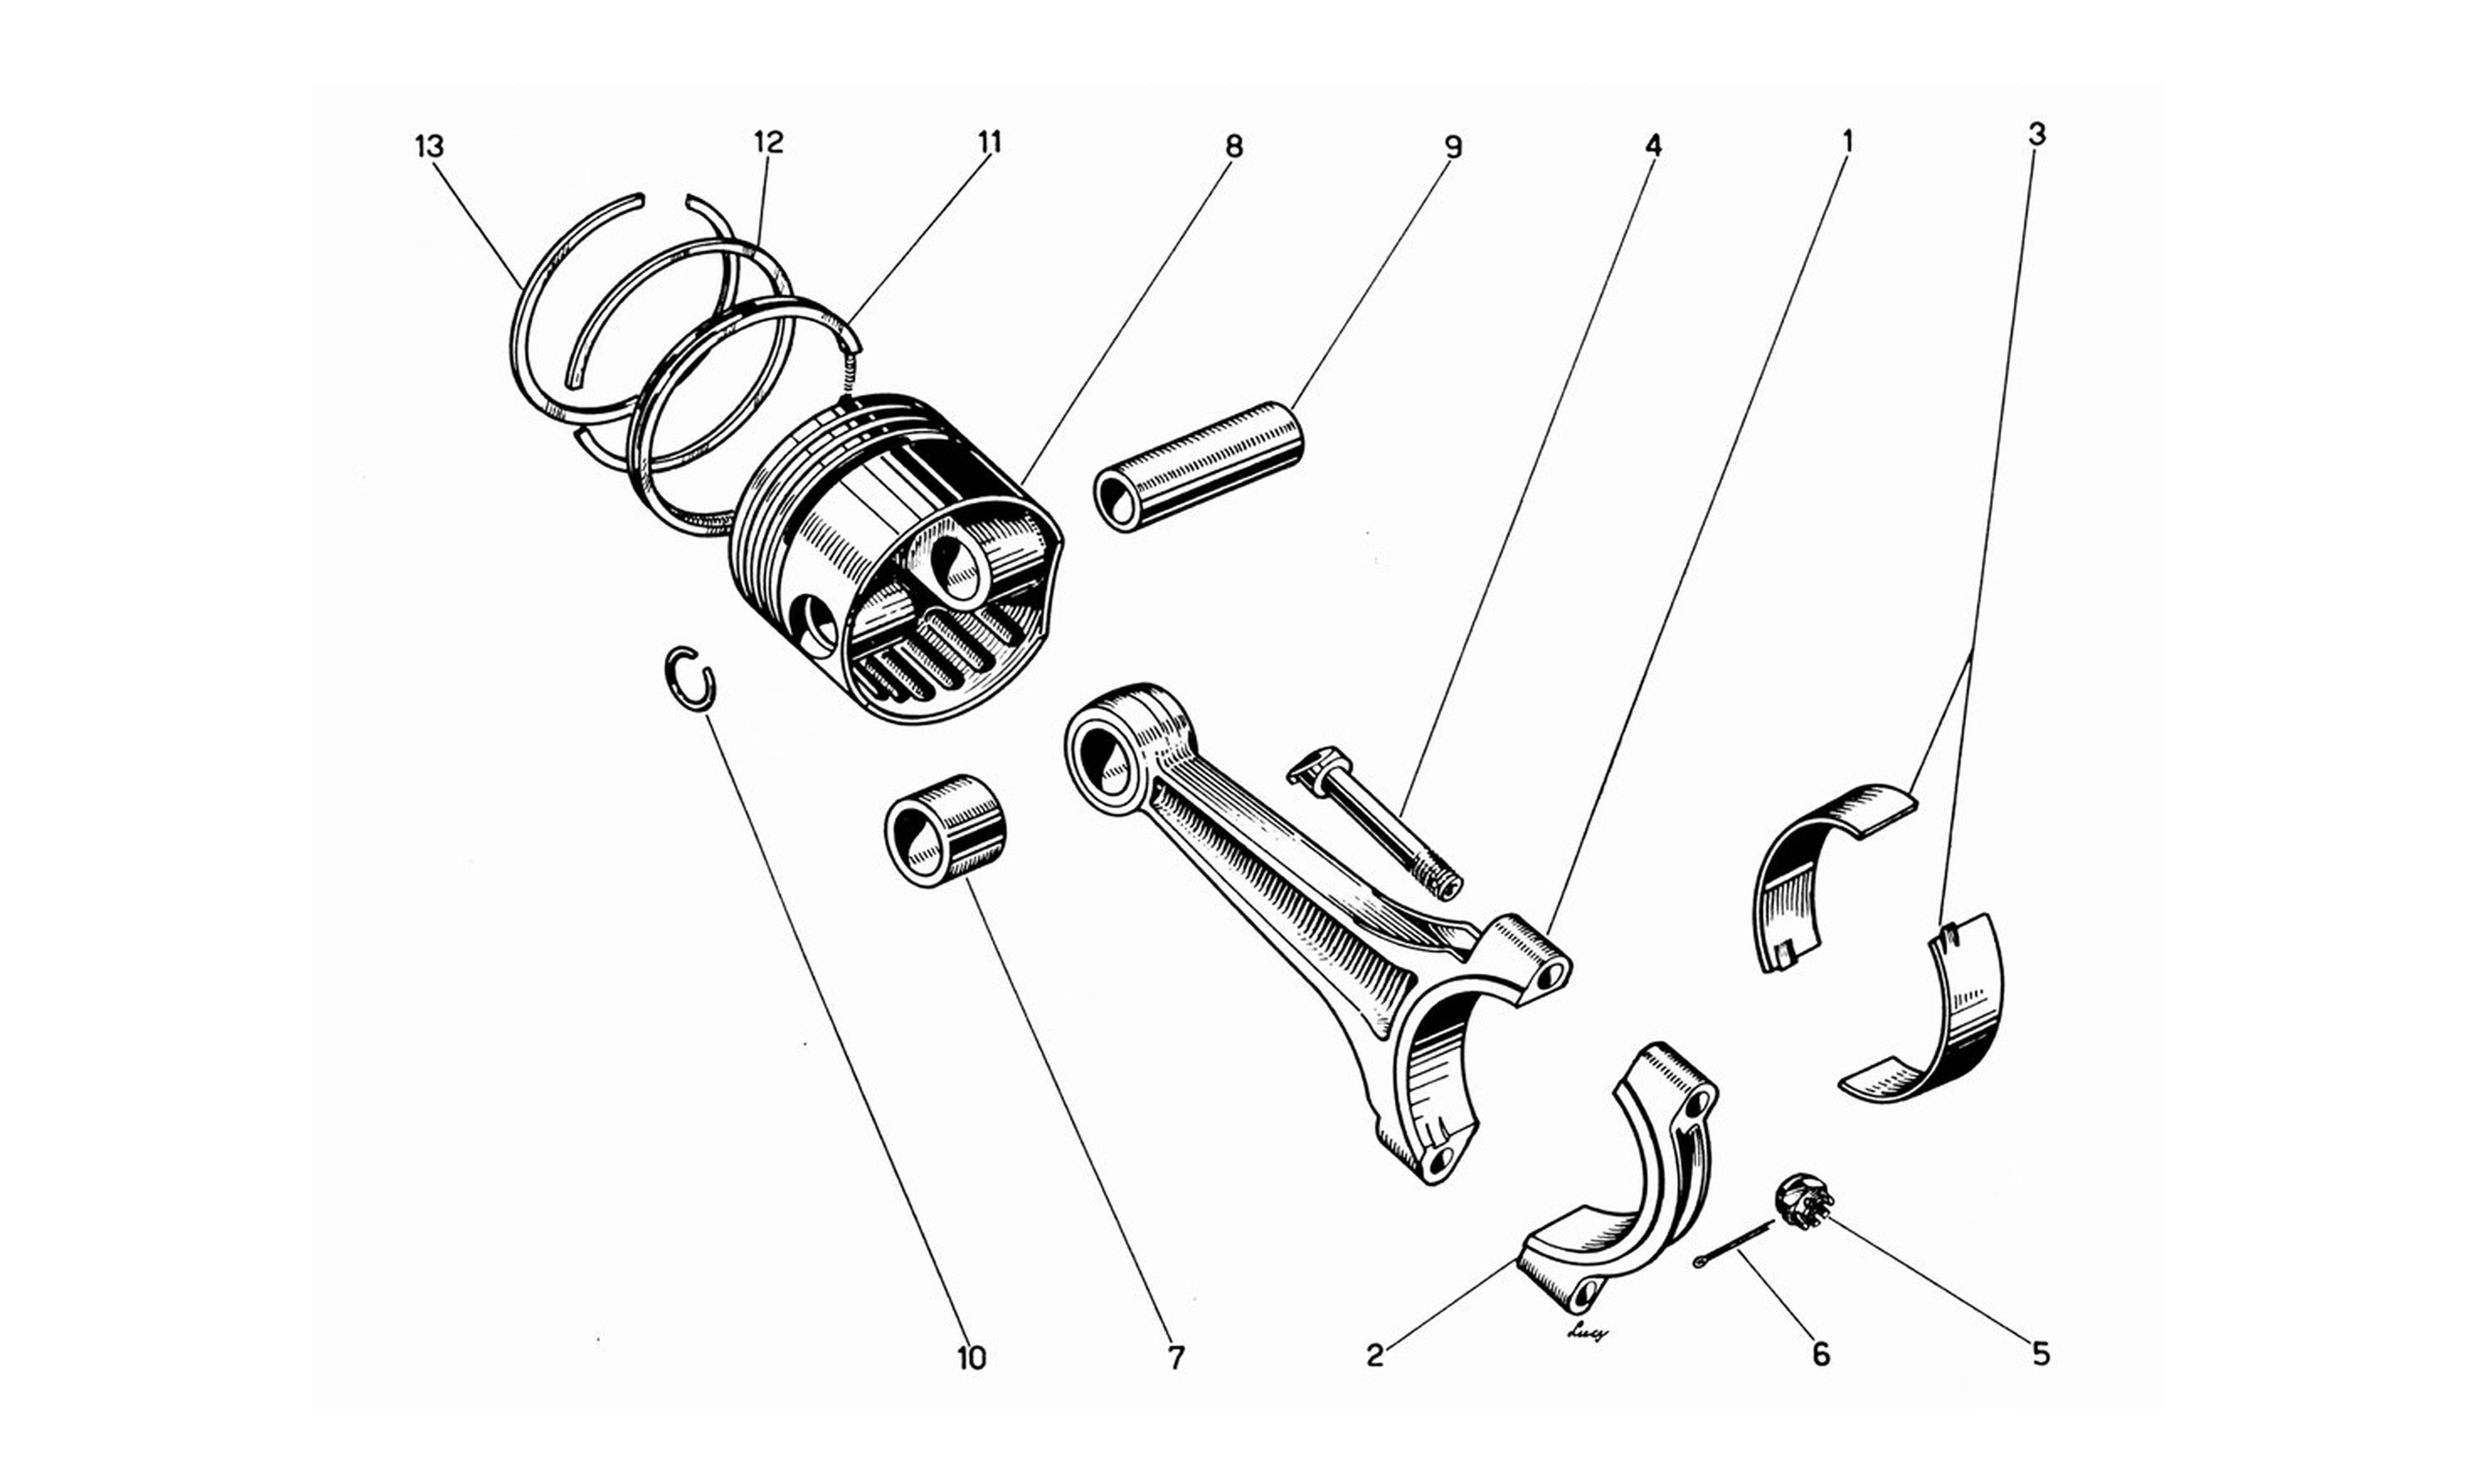 Schematic: Connecting Rods